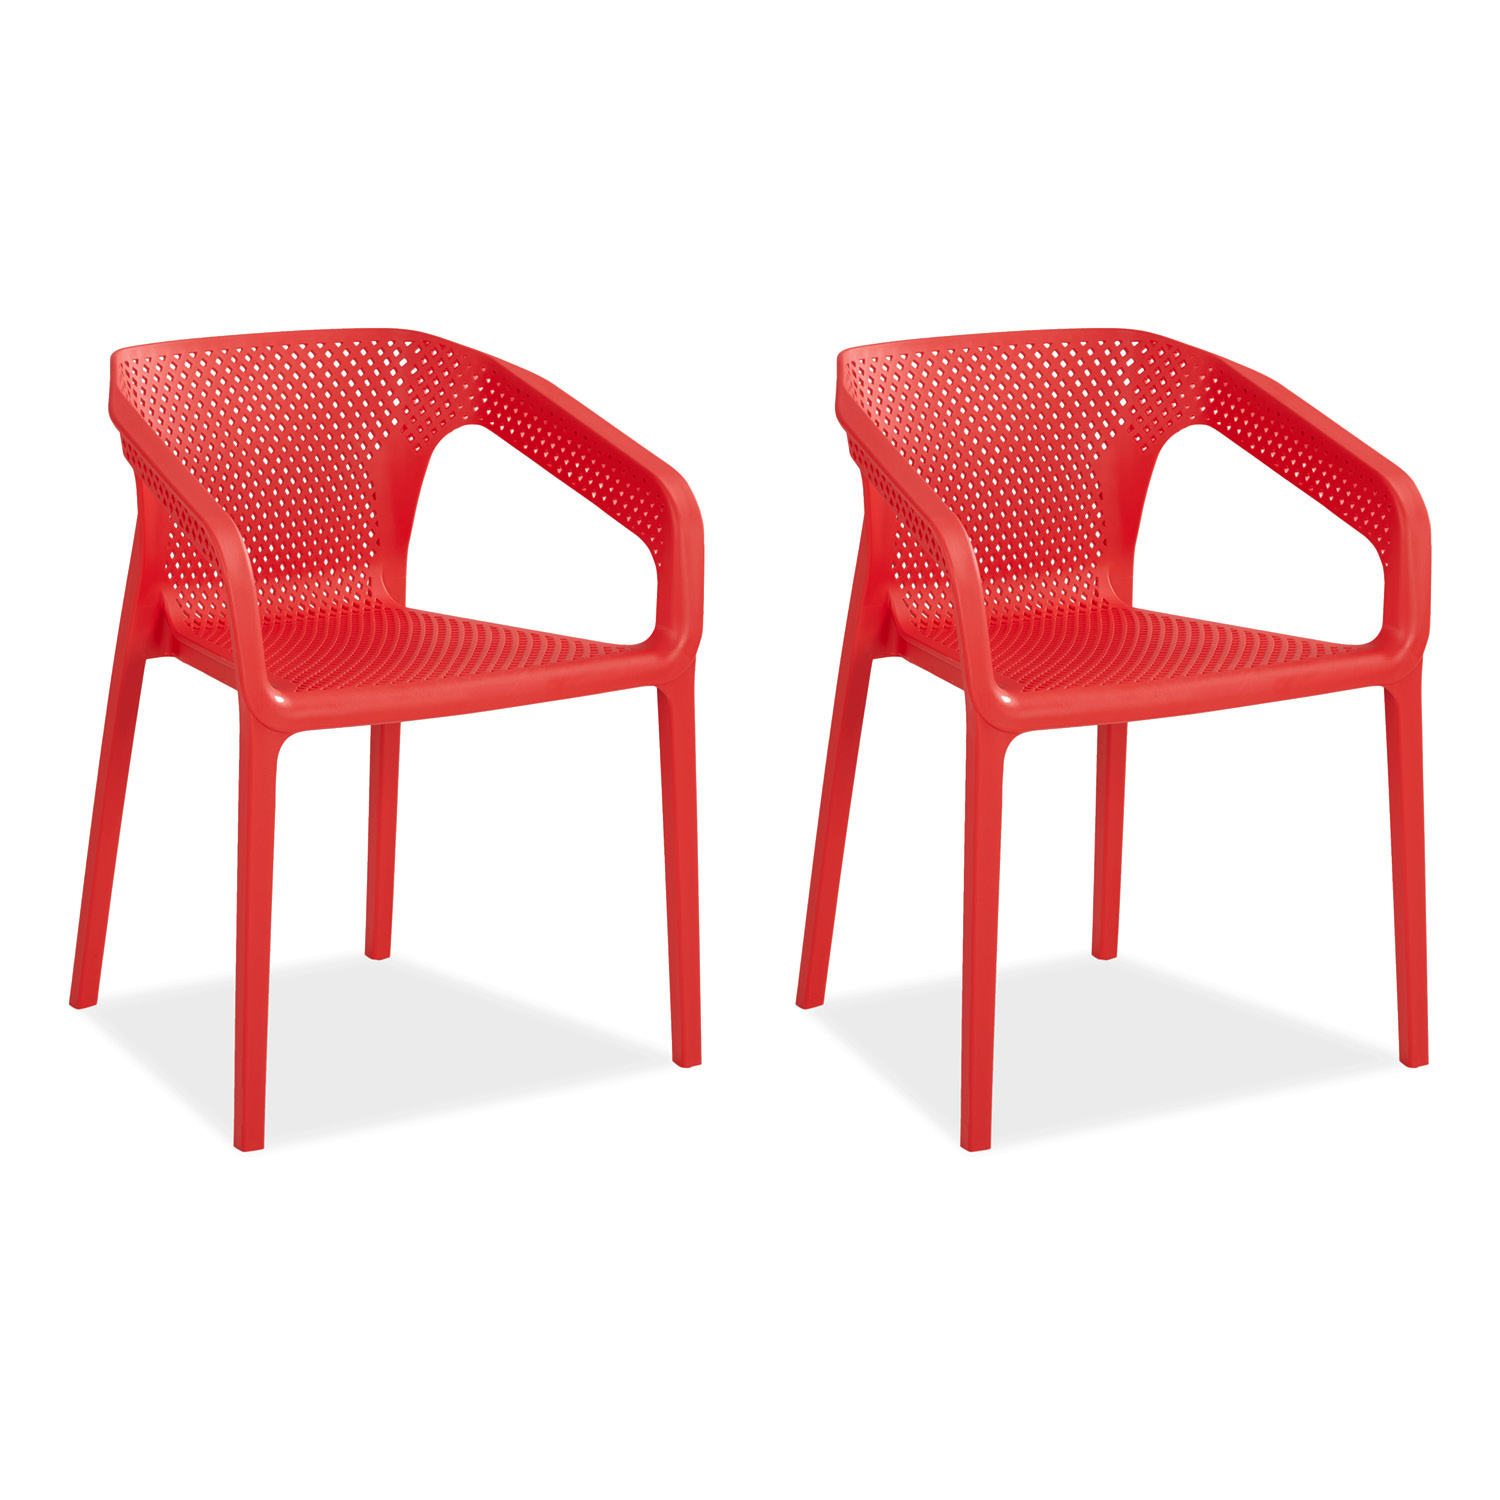 Set of 2 Garden chair with armrests Camping chairs Red Outdoor chairs Plastic Egg chair Lounger chairs Stacking chairs